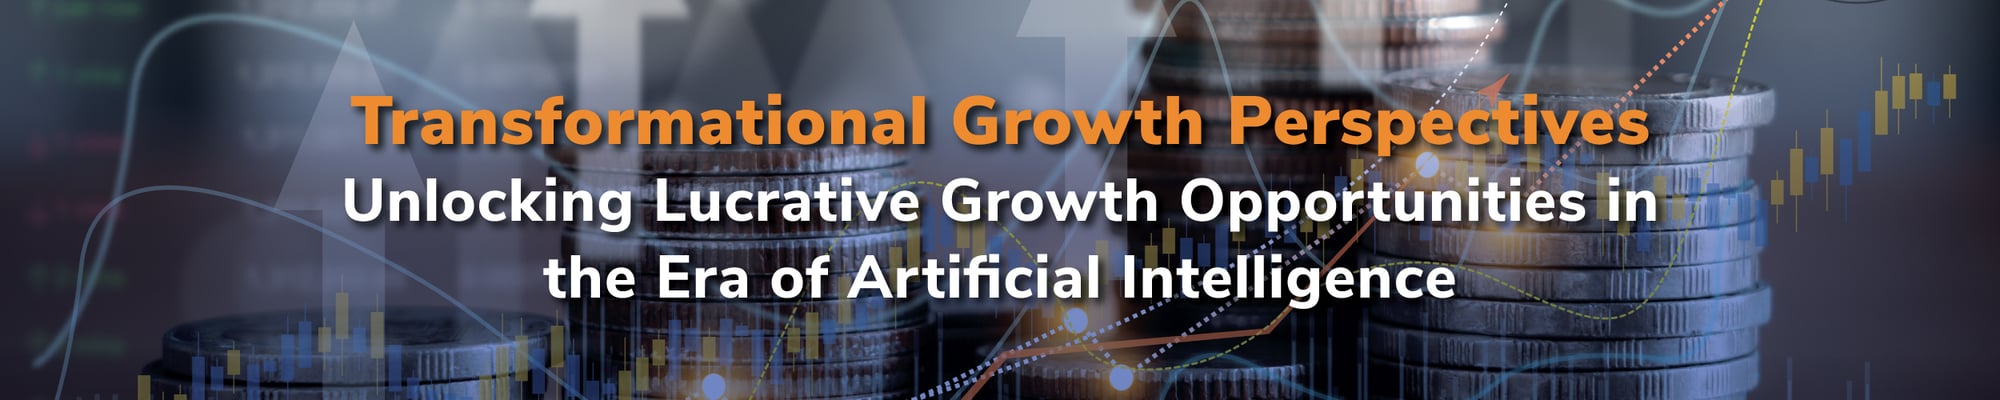 Transformational Growth Perspectives 	Unlocking Lucrative Growth Opportunities in the Era of Artificial Intelligence